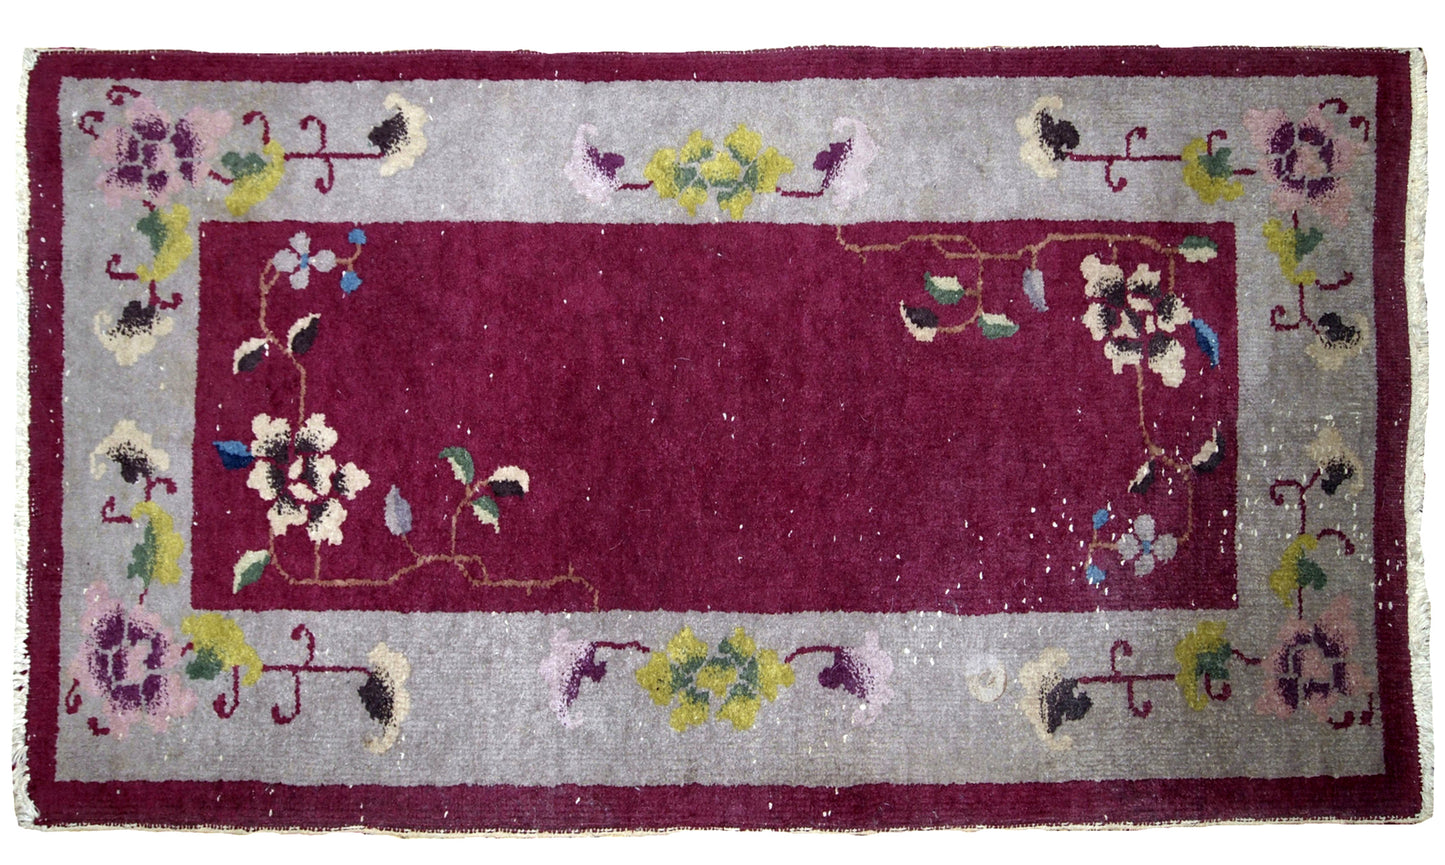 Antique Art Deco Chinese rug in Bordeaux and silver shades. The rug is from 1920s in original good condition.